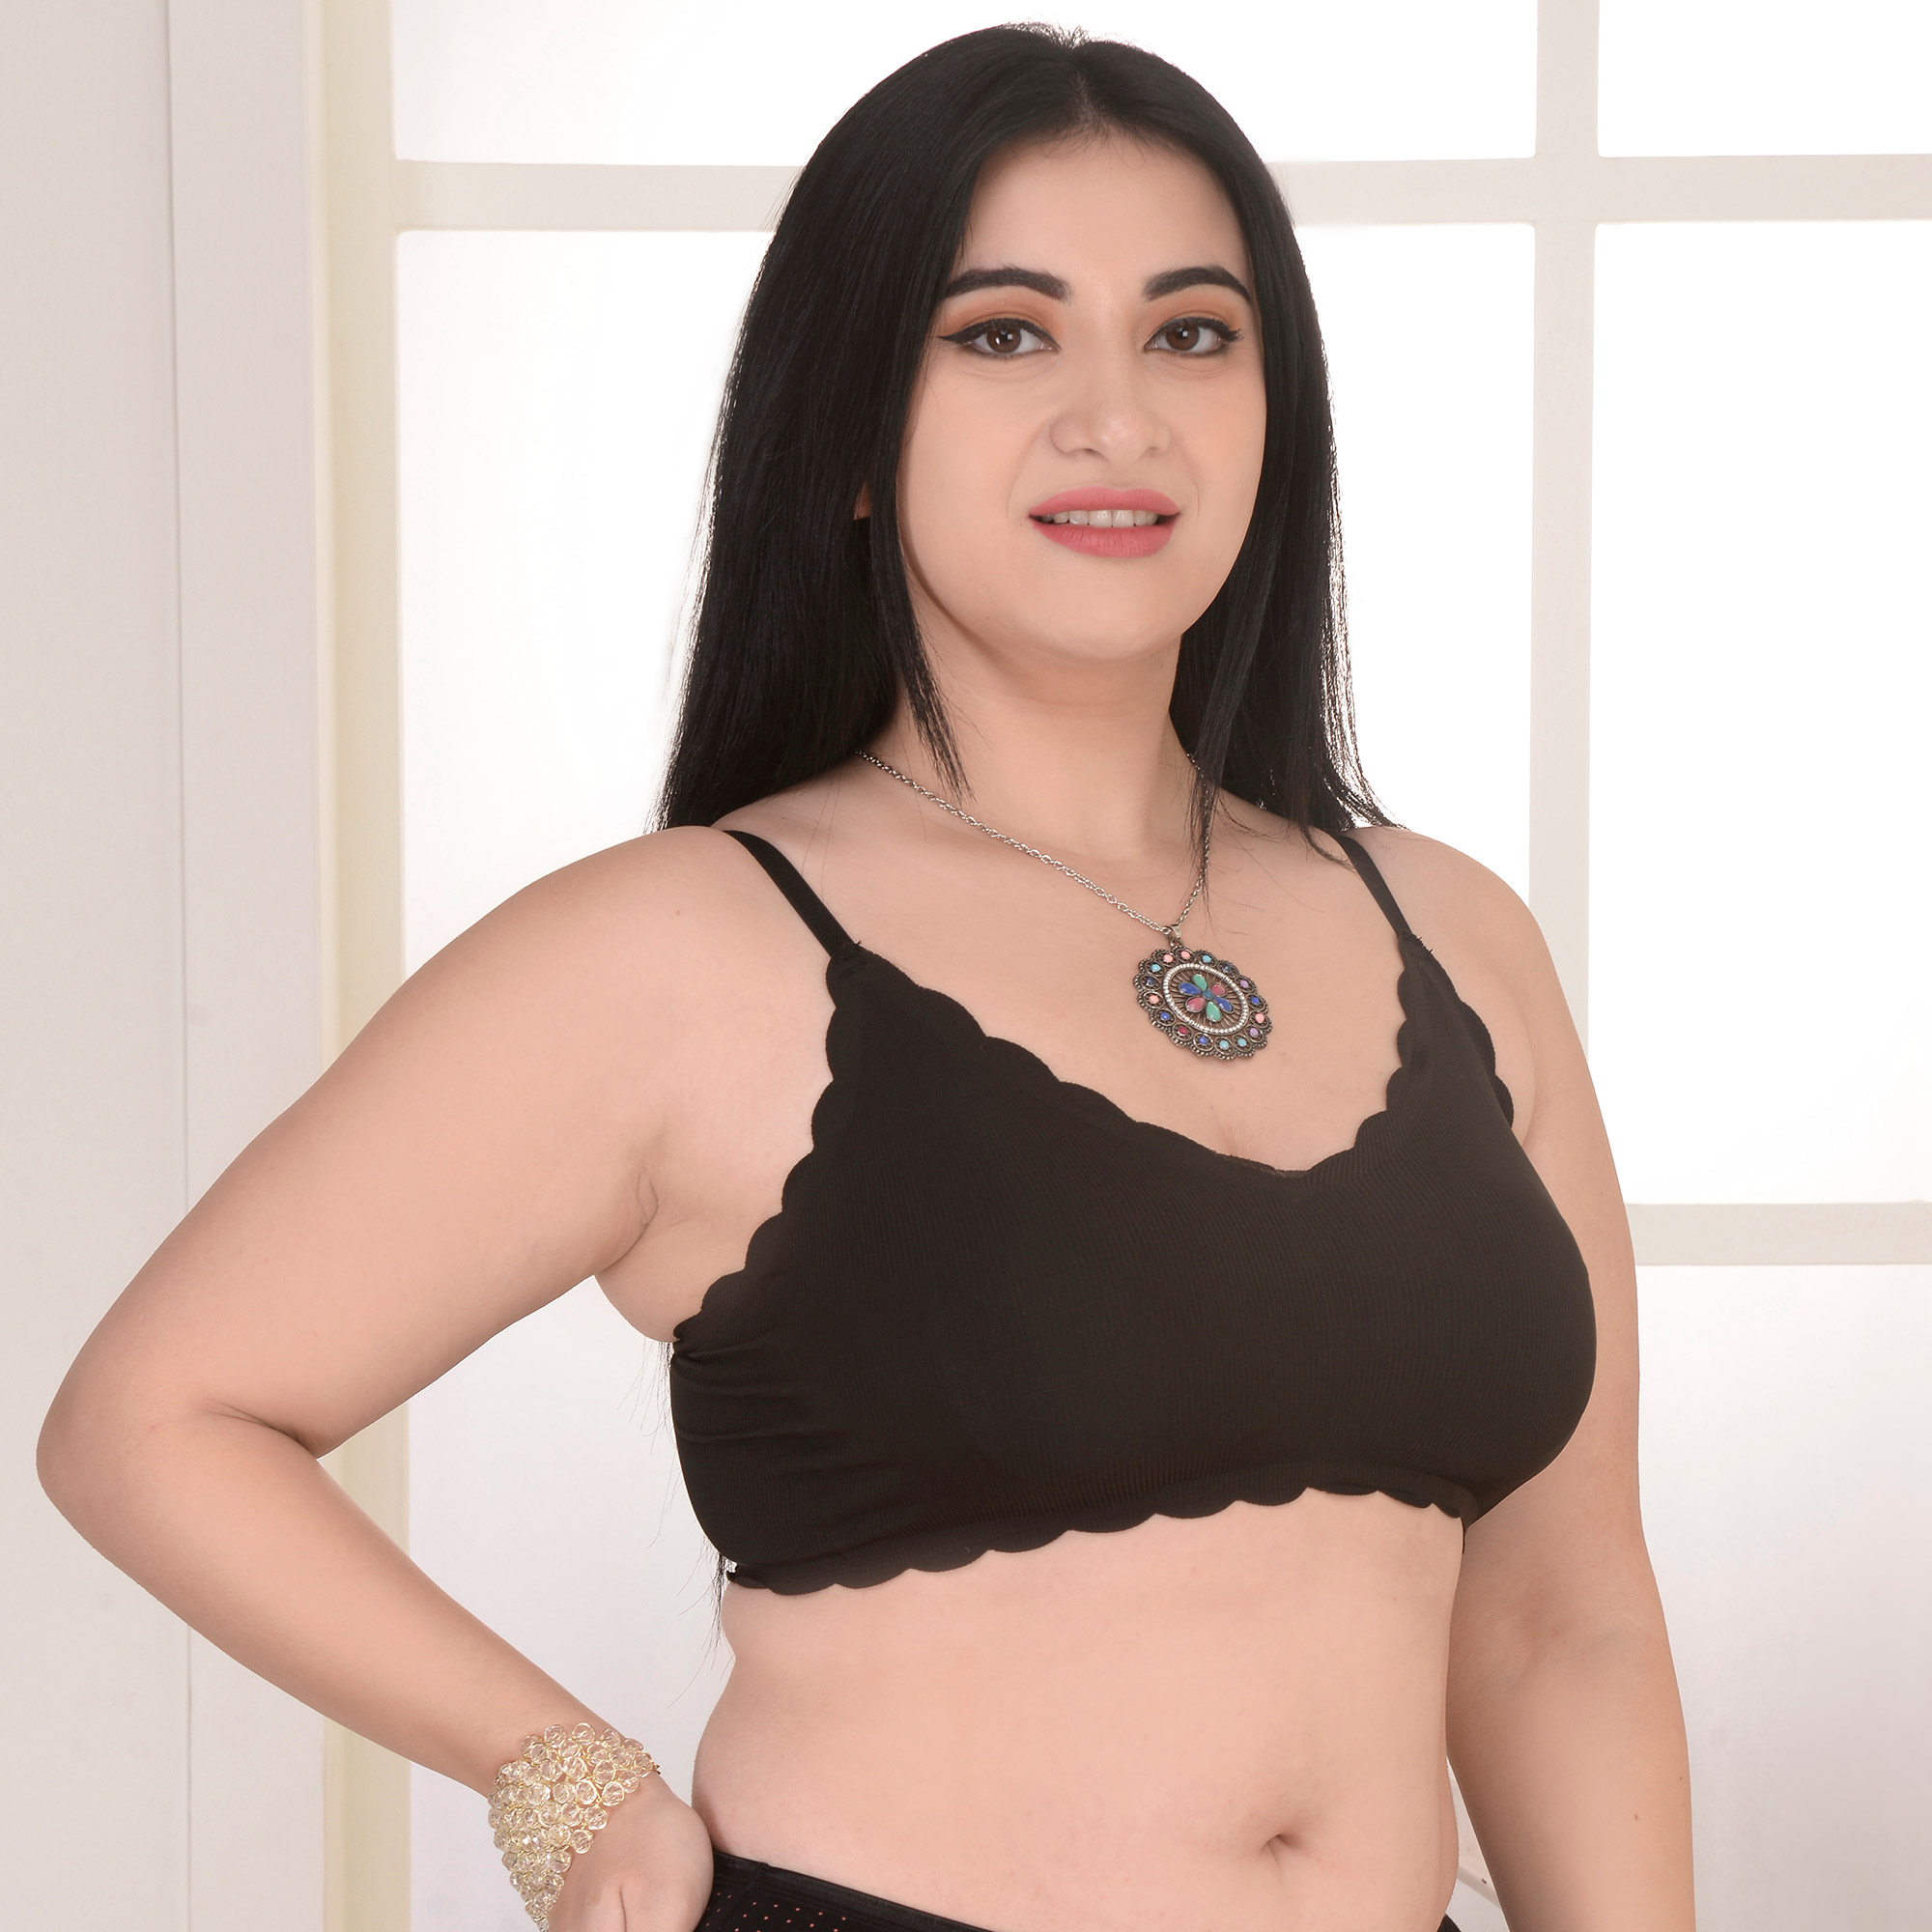 Lovebird lingerie - Lovebird Padded Non Wired Full Coverage Sports Cum-Bra  . Perfect for Gym & All Day Wear Lightly padded cups for an enhanced shape  & reduced nipple show-through Wire-free for